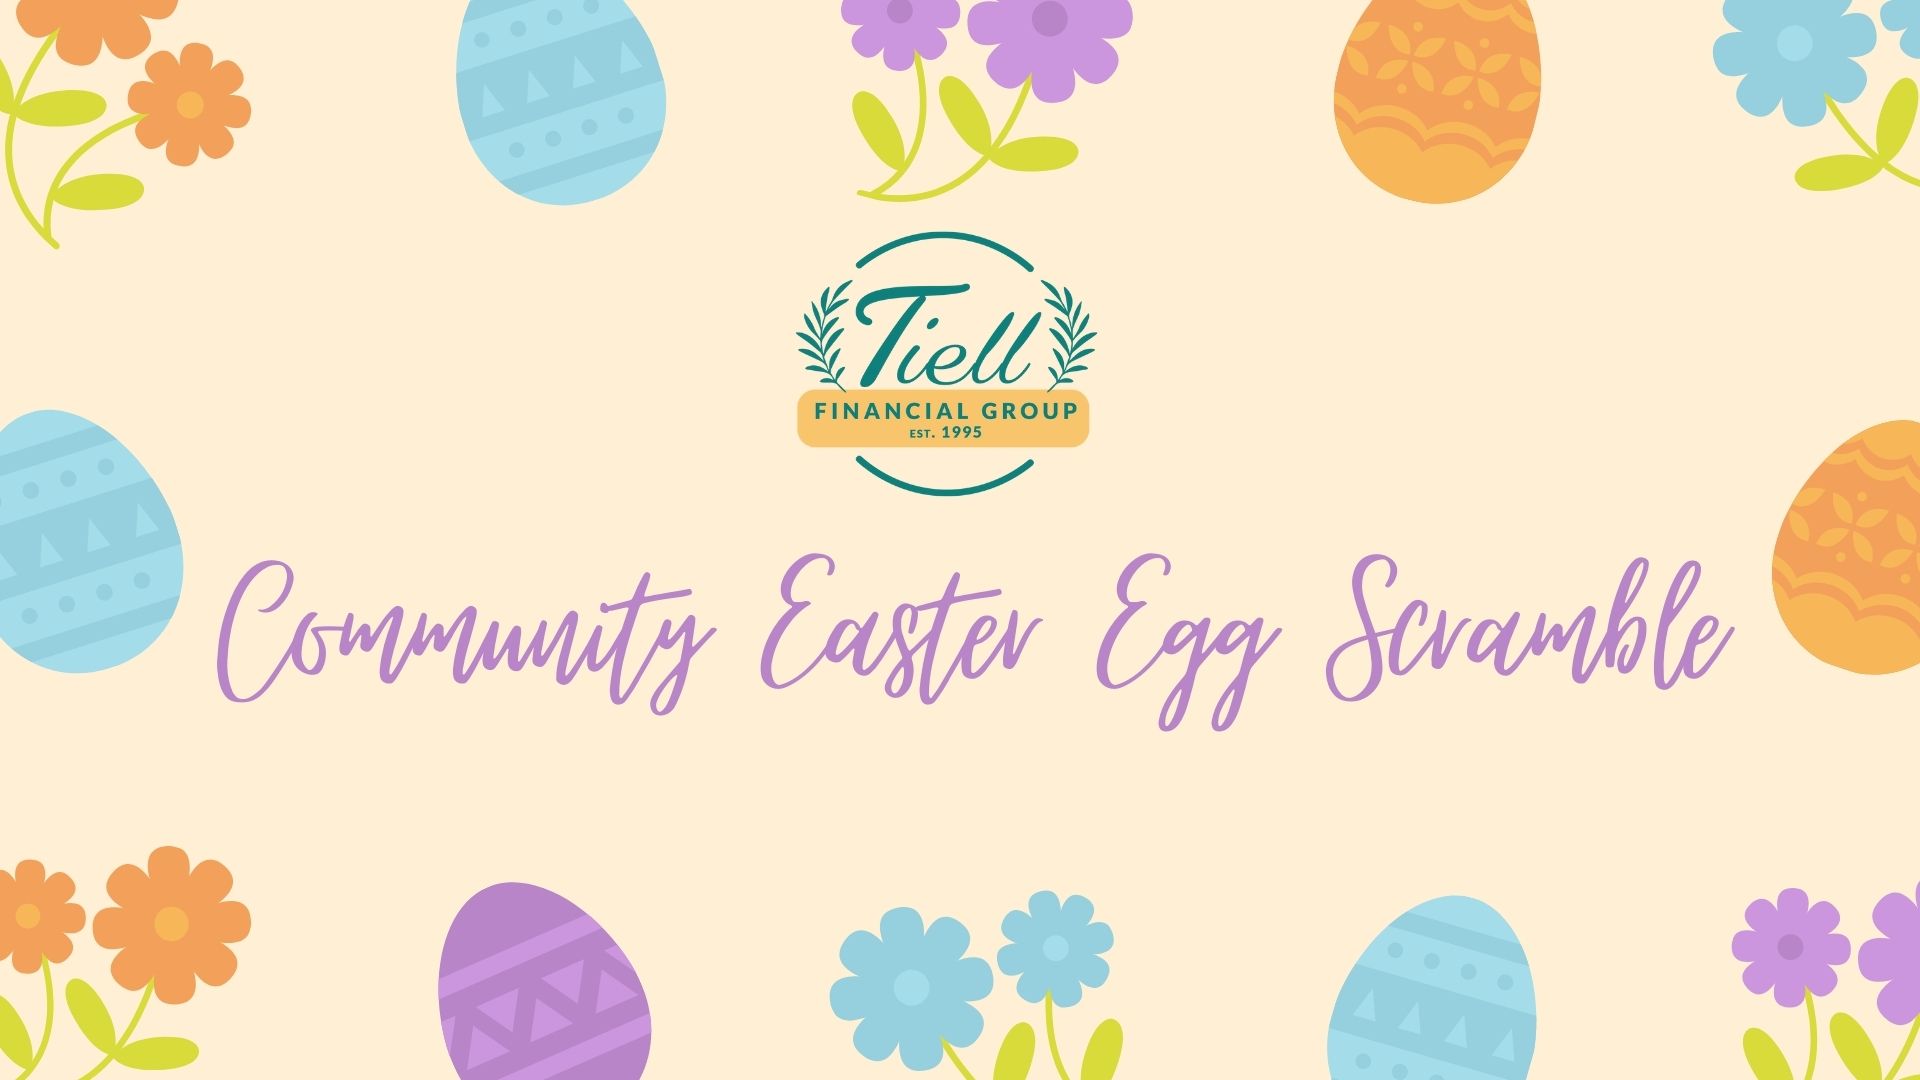 Community Easter Egg Scramble Presented by Tiell Financial